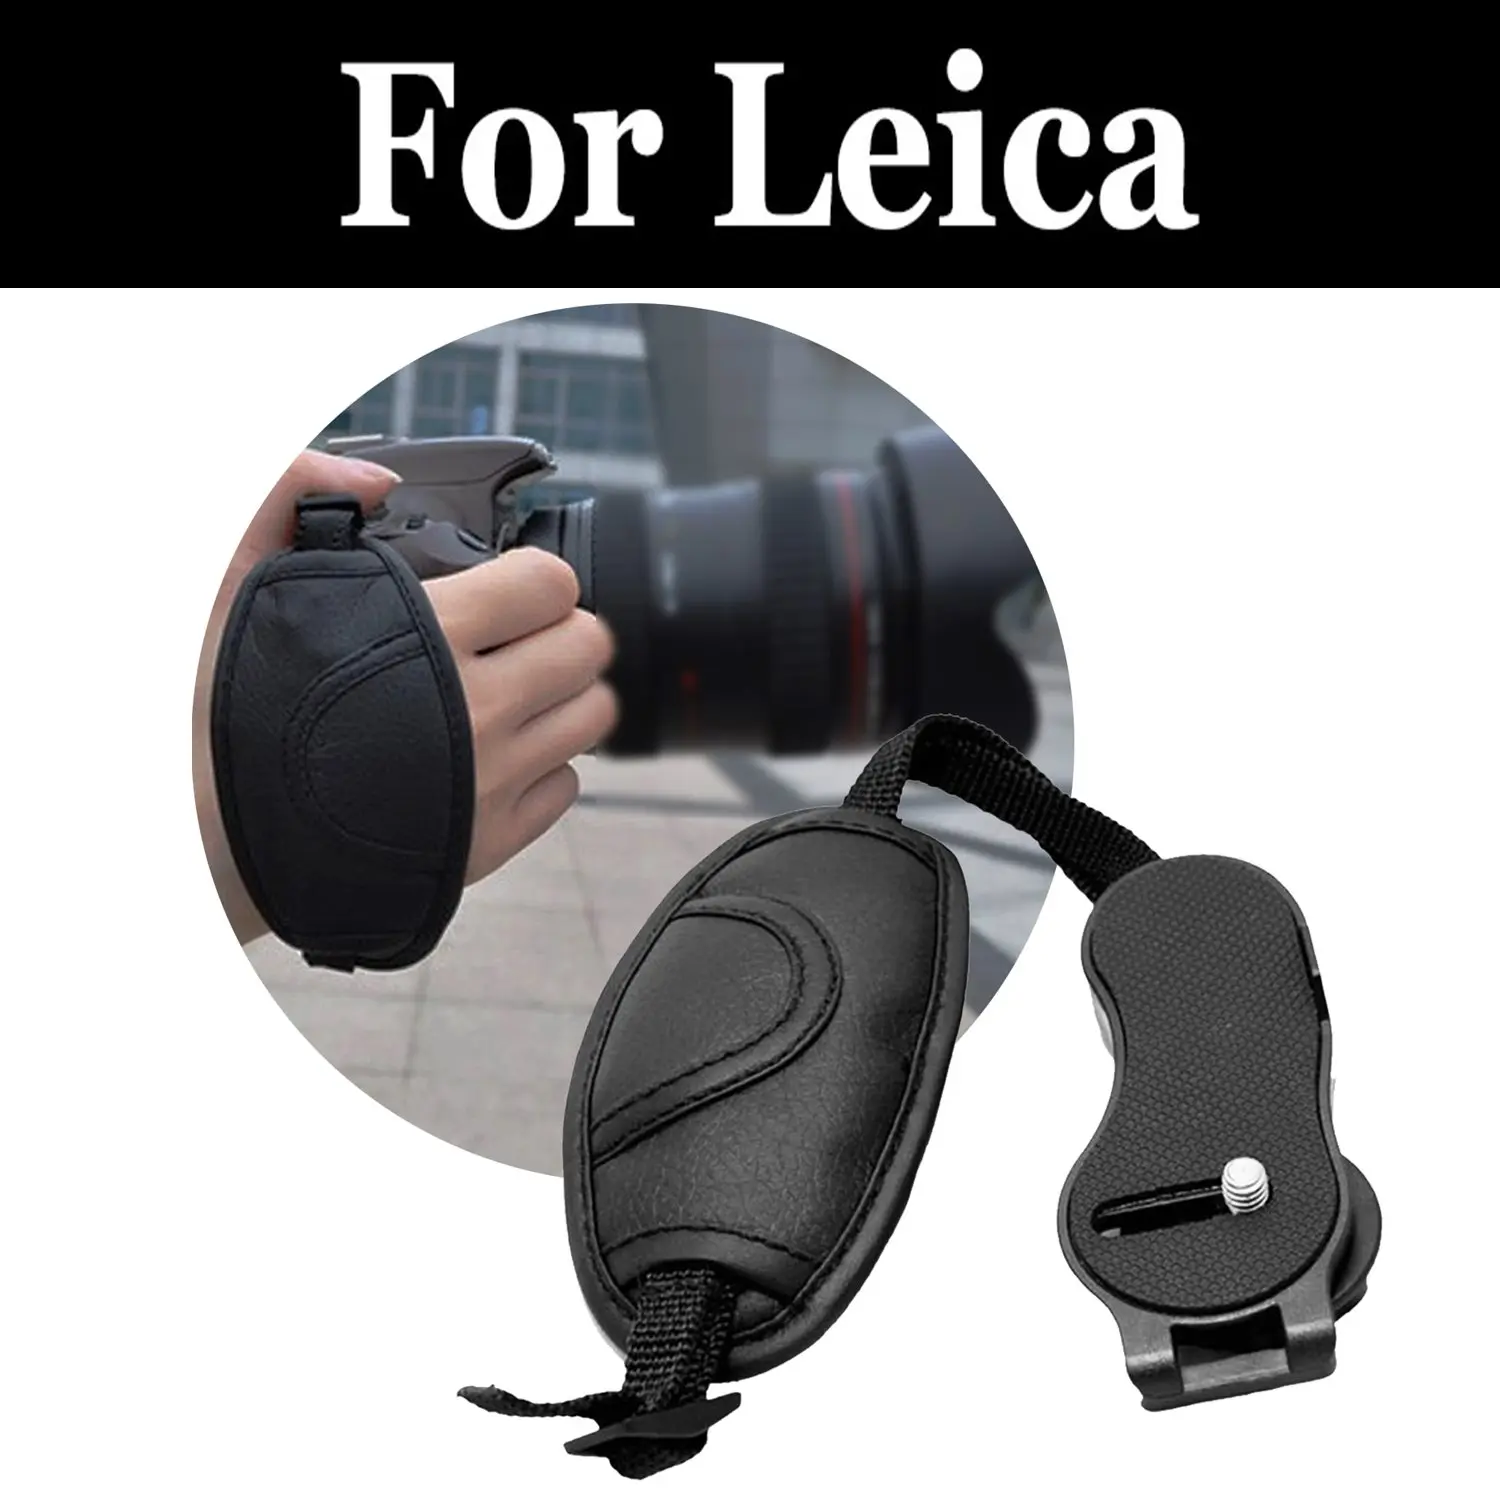 

Universal SLR Wrist Hand Strap Digital Camera Strap for Sport Taking Pictures For leica C-Lux D-Lux 5 6 7 Typ 112 109 262 246